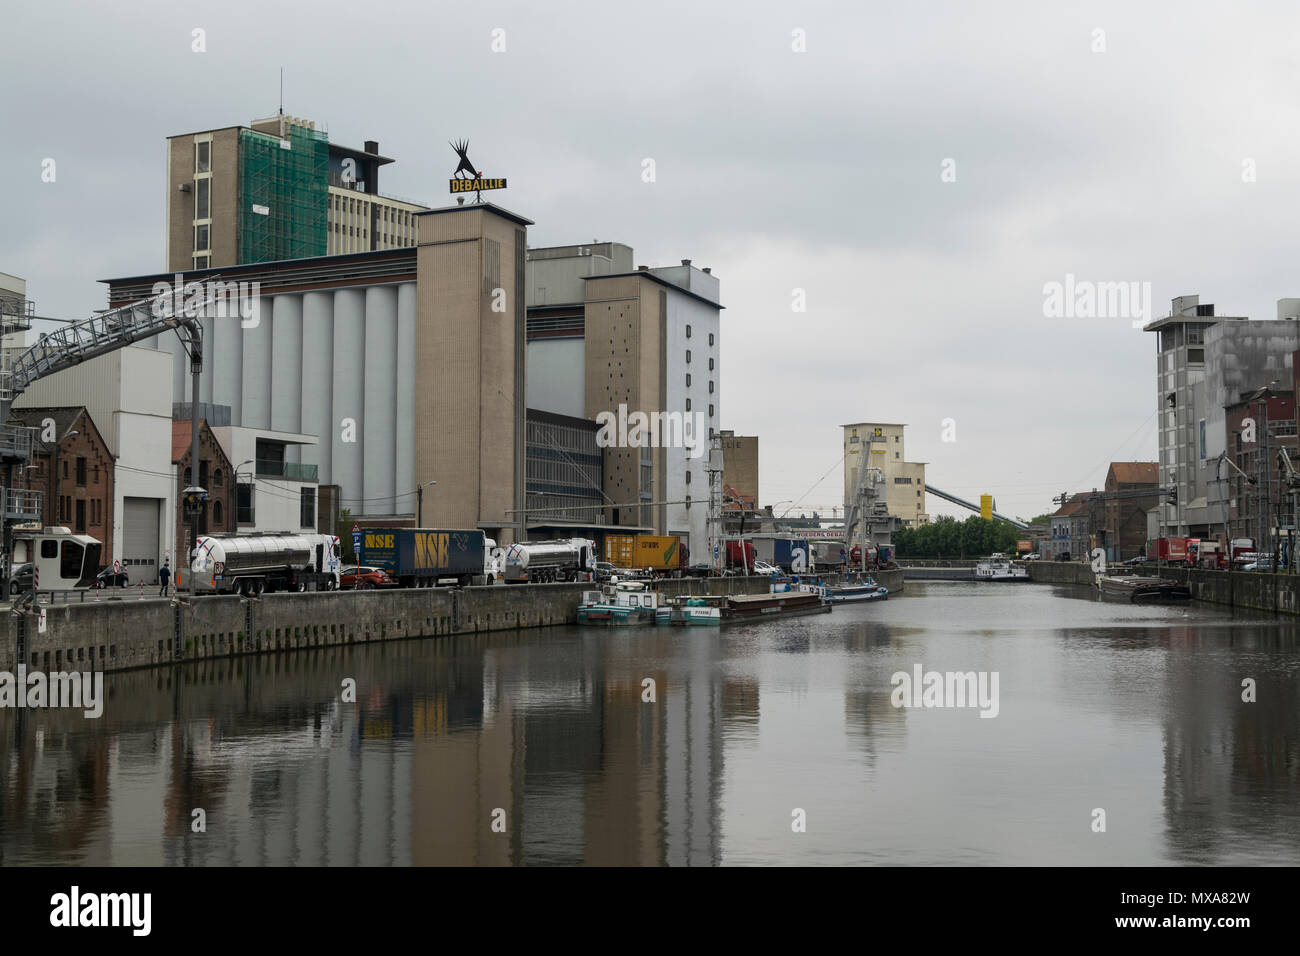 The canal in Roeselare, where most of the industry is located Stock Photo